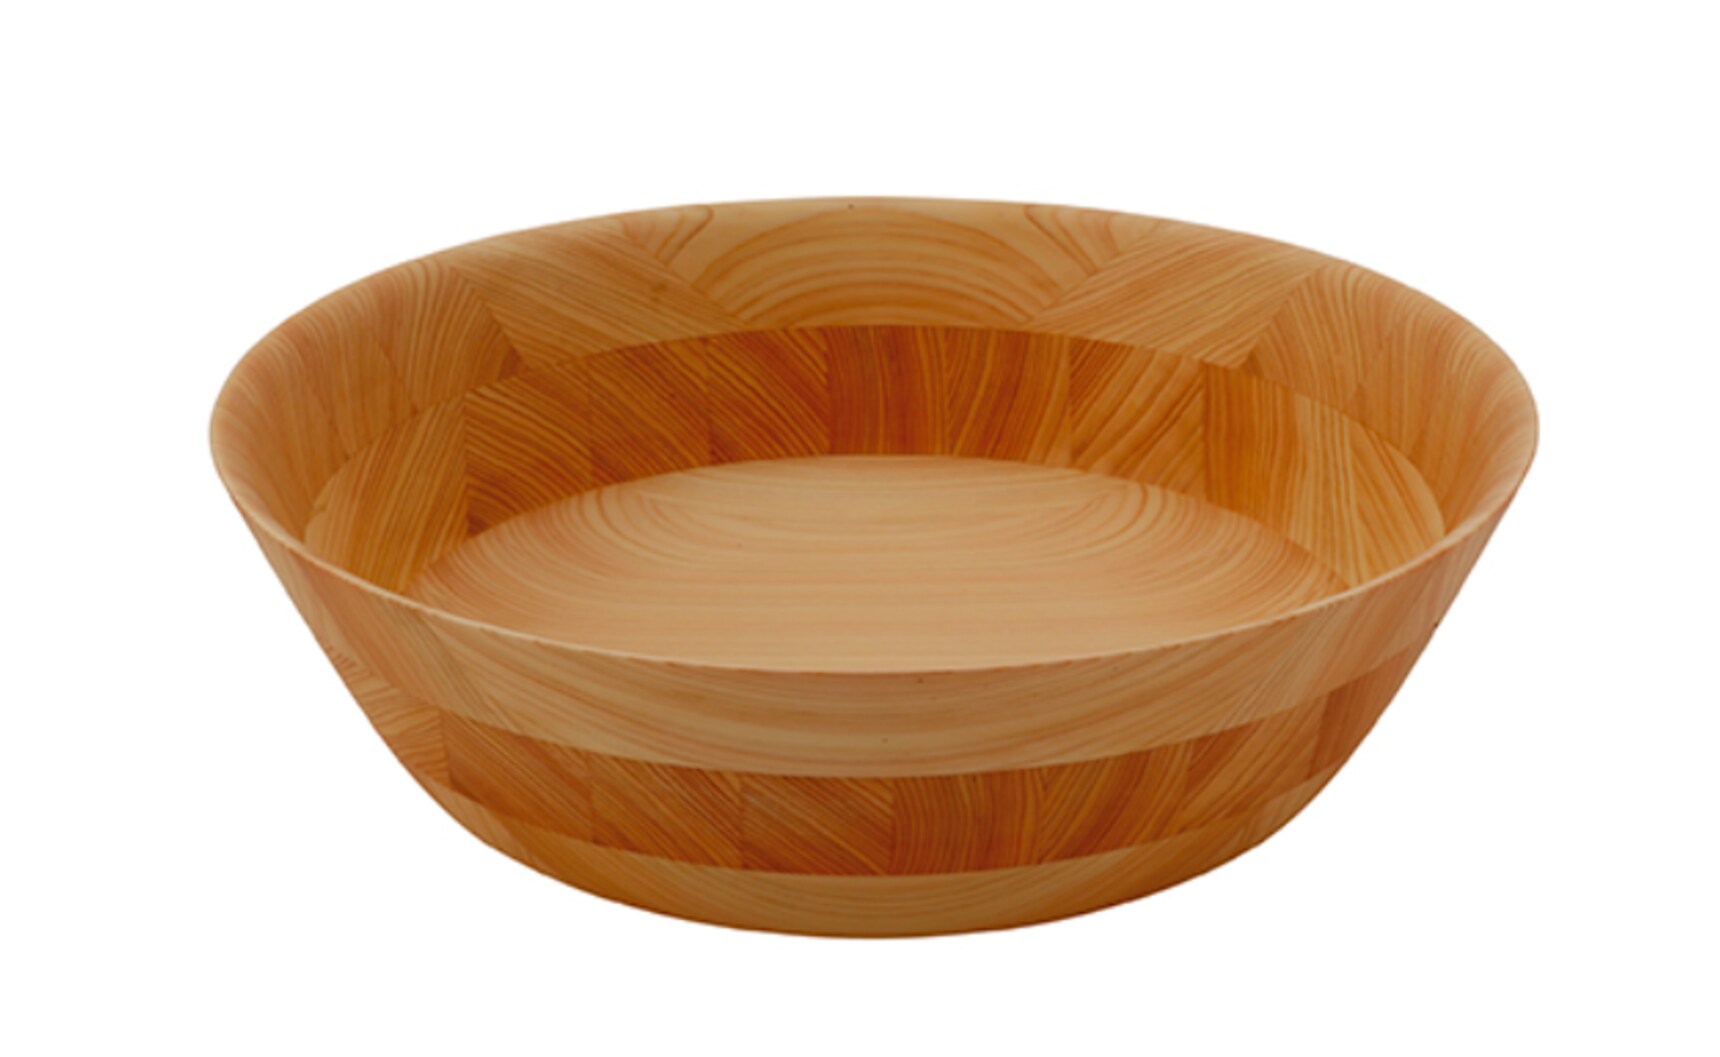 7 Exquisite Bowls from Different Materials